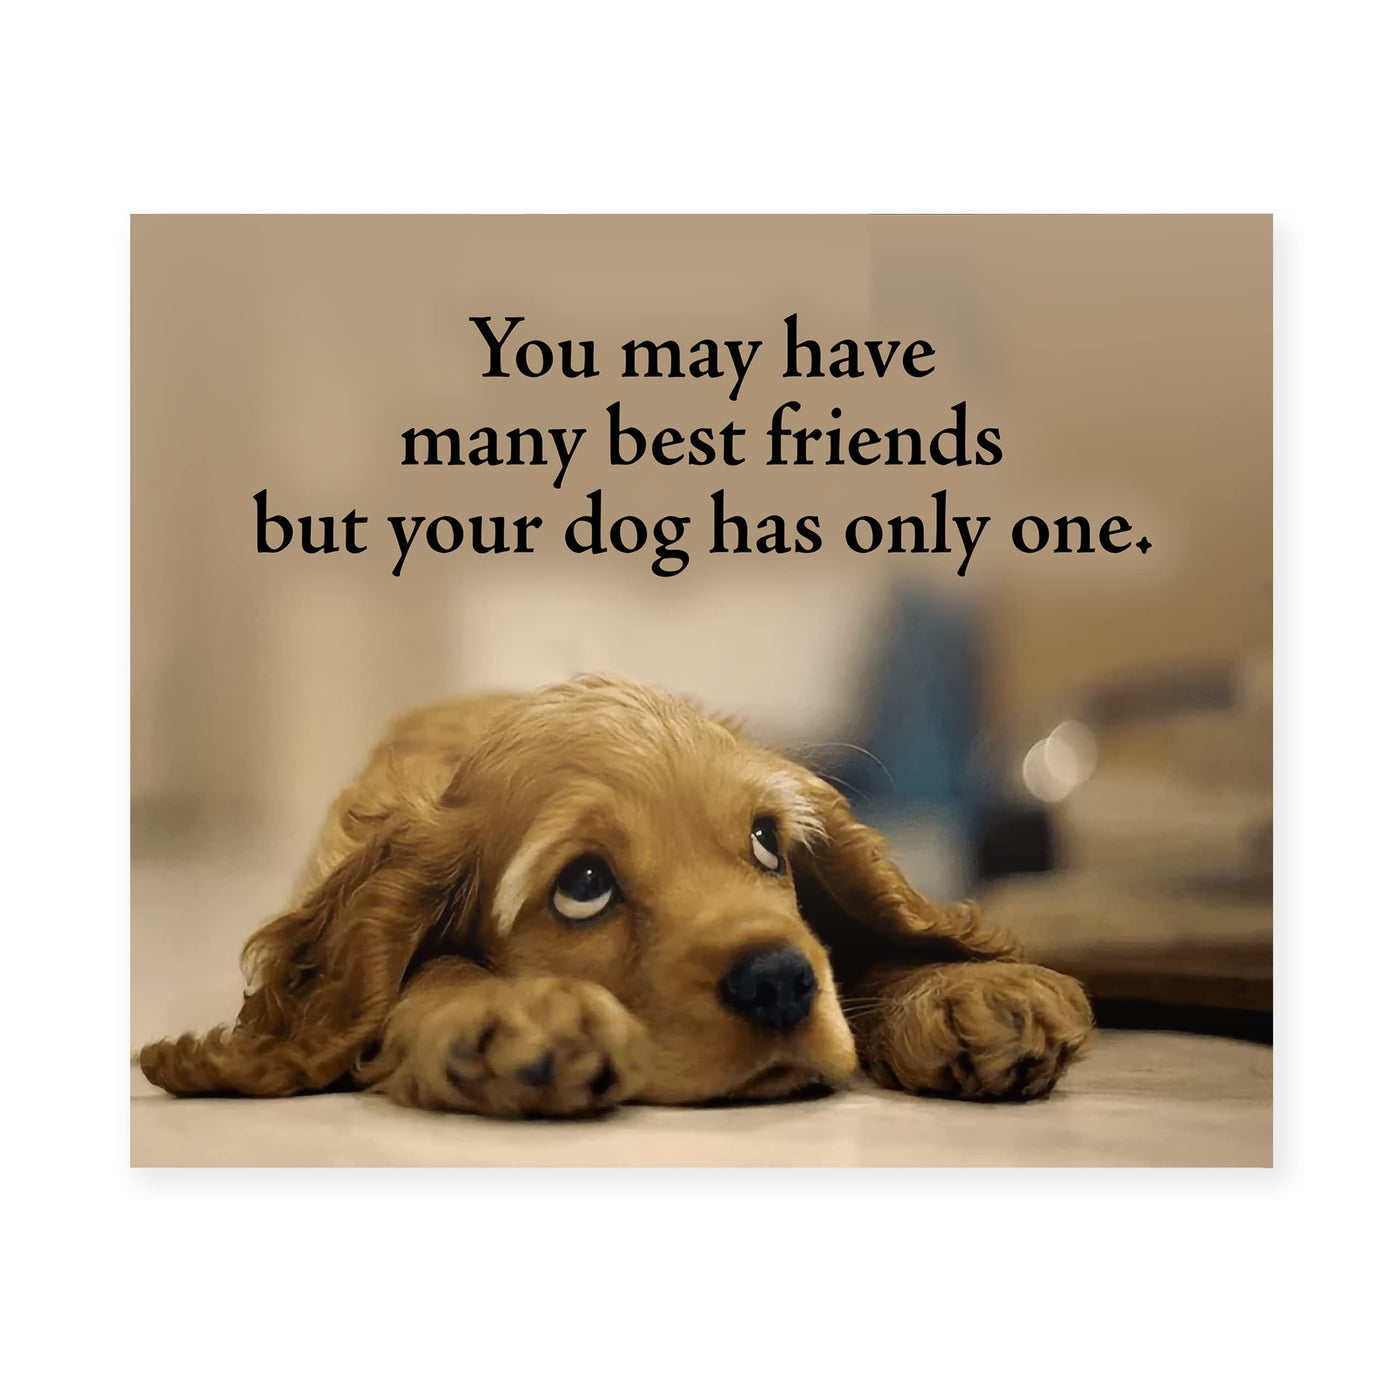 Your Dog Only Has One Best Friend Inspirational Pet Wall Art Sign -10 x 8" Cute Typographic Puppy Picture Print -Ready to Frame. Home-Vet's Office Decor. Great Gift & Reminder for All Dog Lovers!